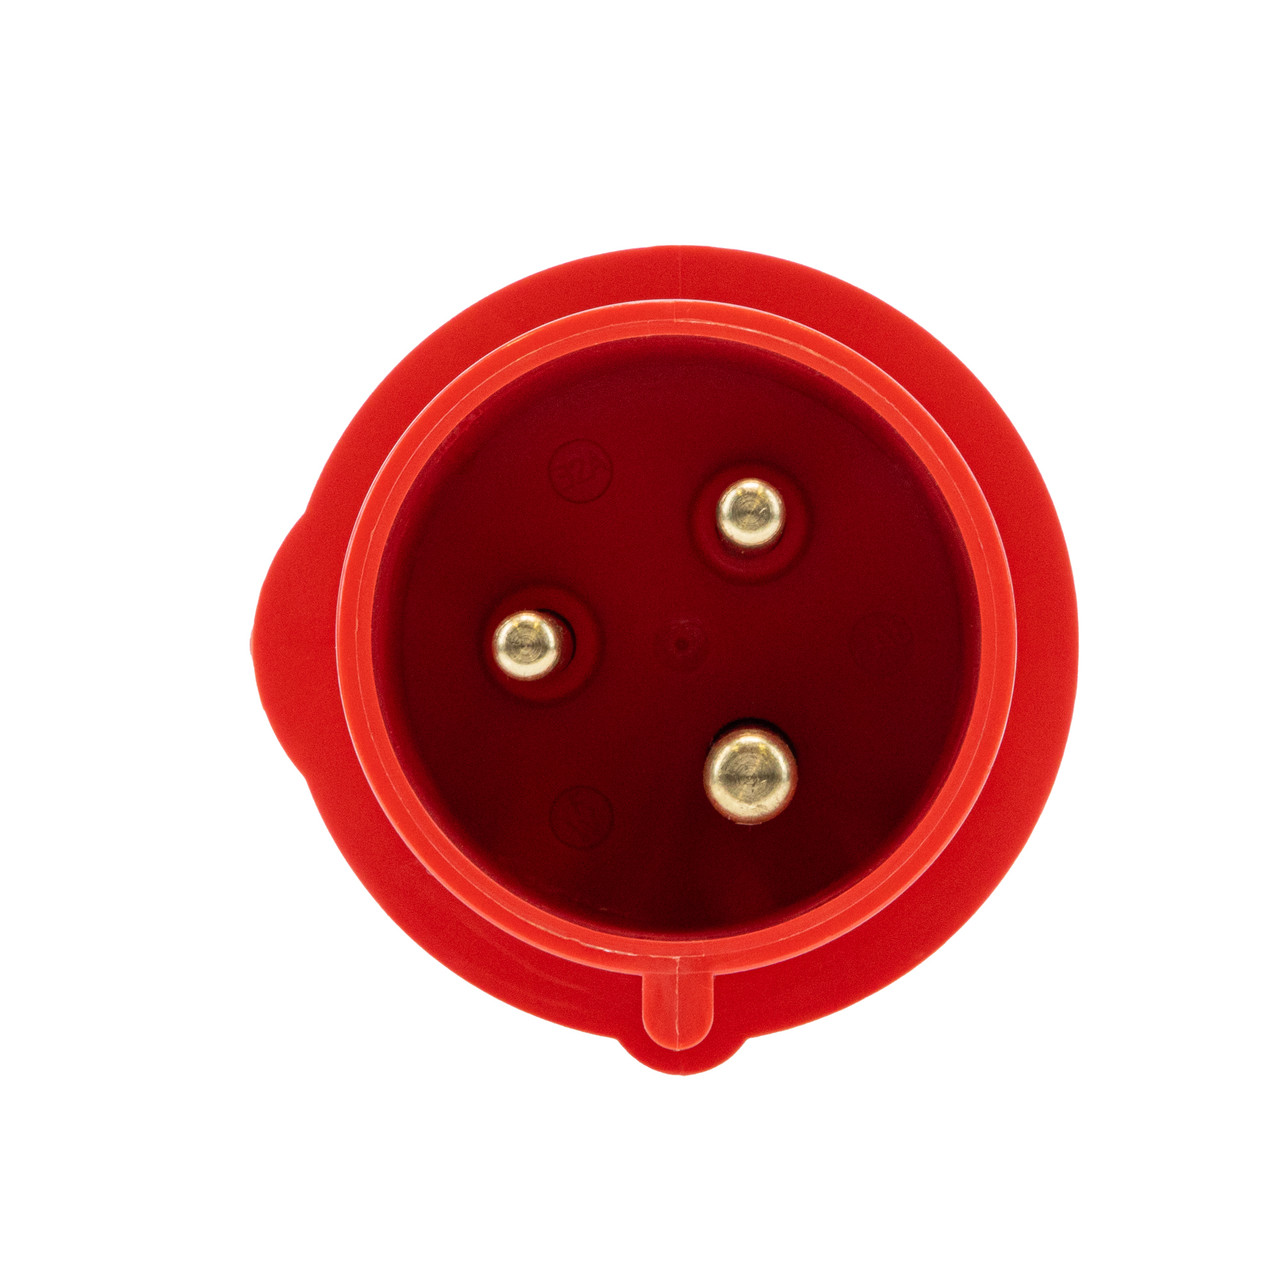 Walther Electric 230319 Pin and Sleeve Plug 30A 3 Wire 480 VAC 7Hr IP44 Splashproof - 330P7 Industrial Grade IEC (Red)